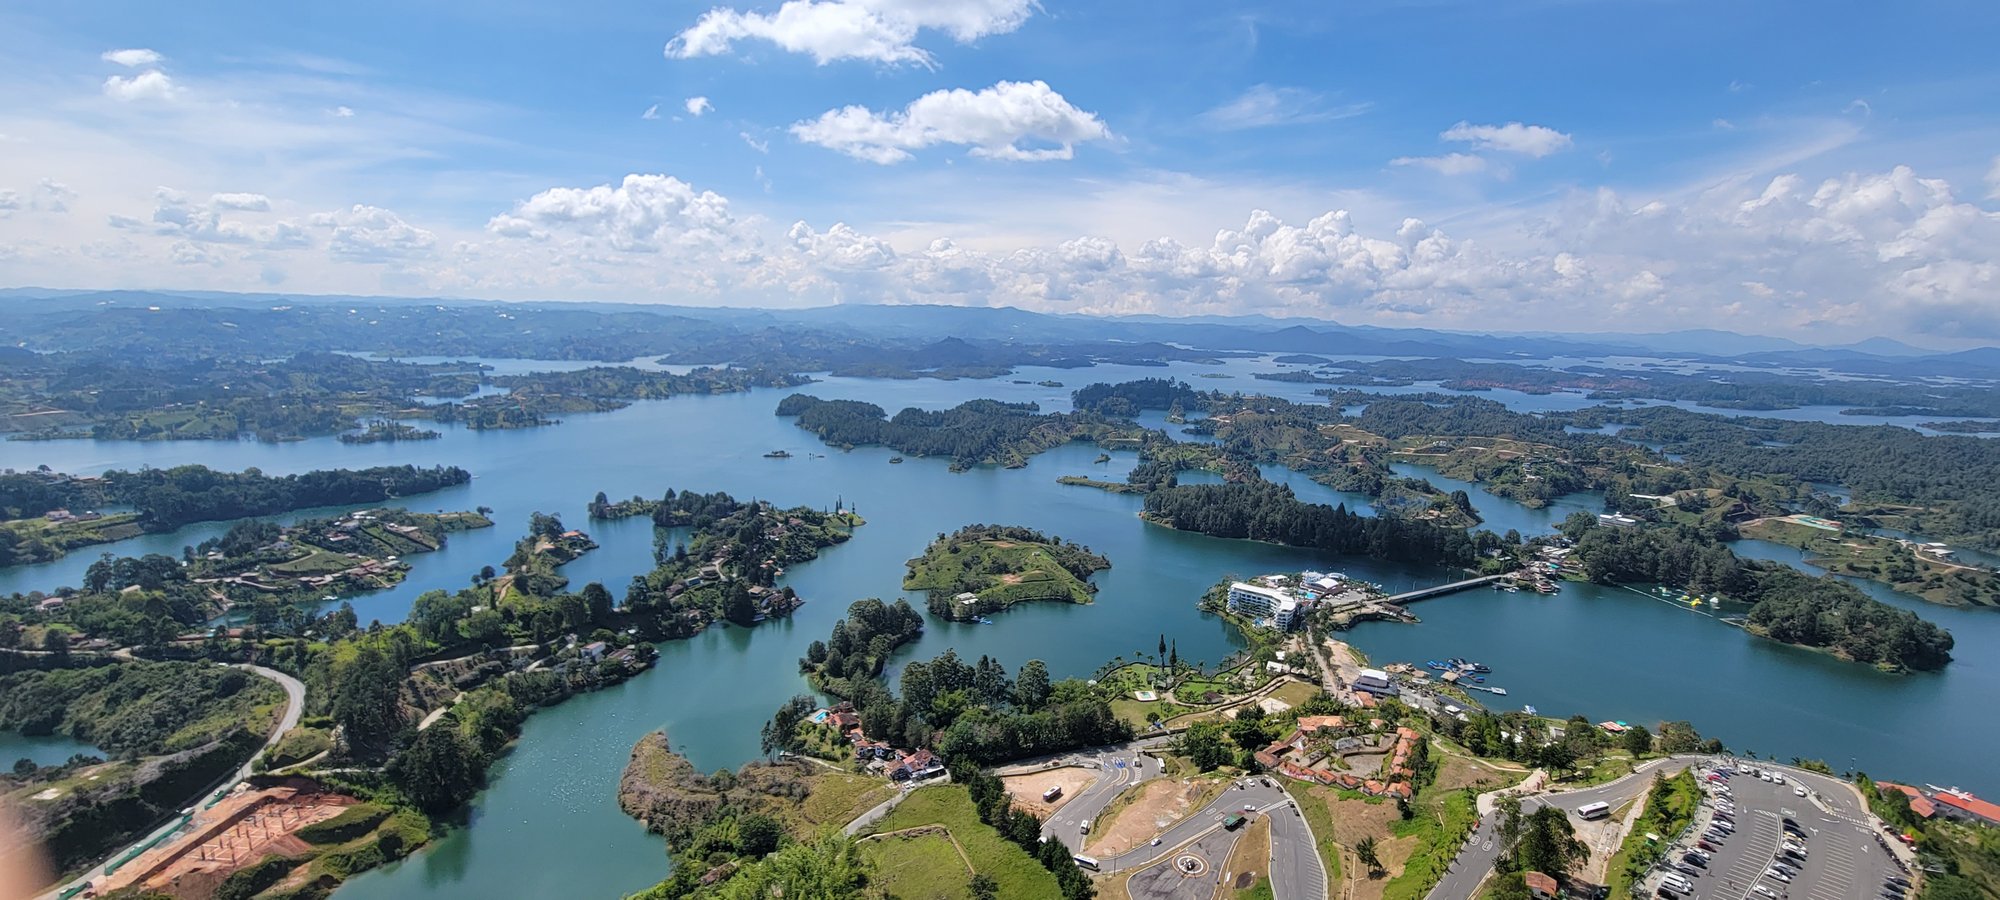 View from El Penol, Guatape, Colombia